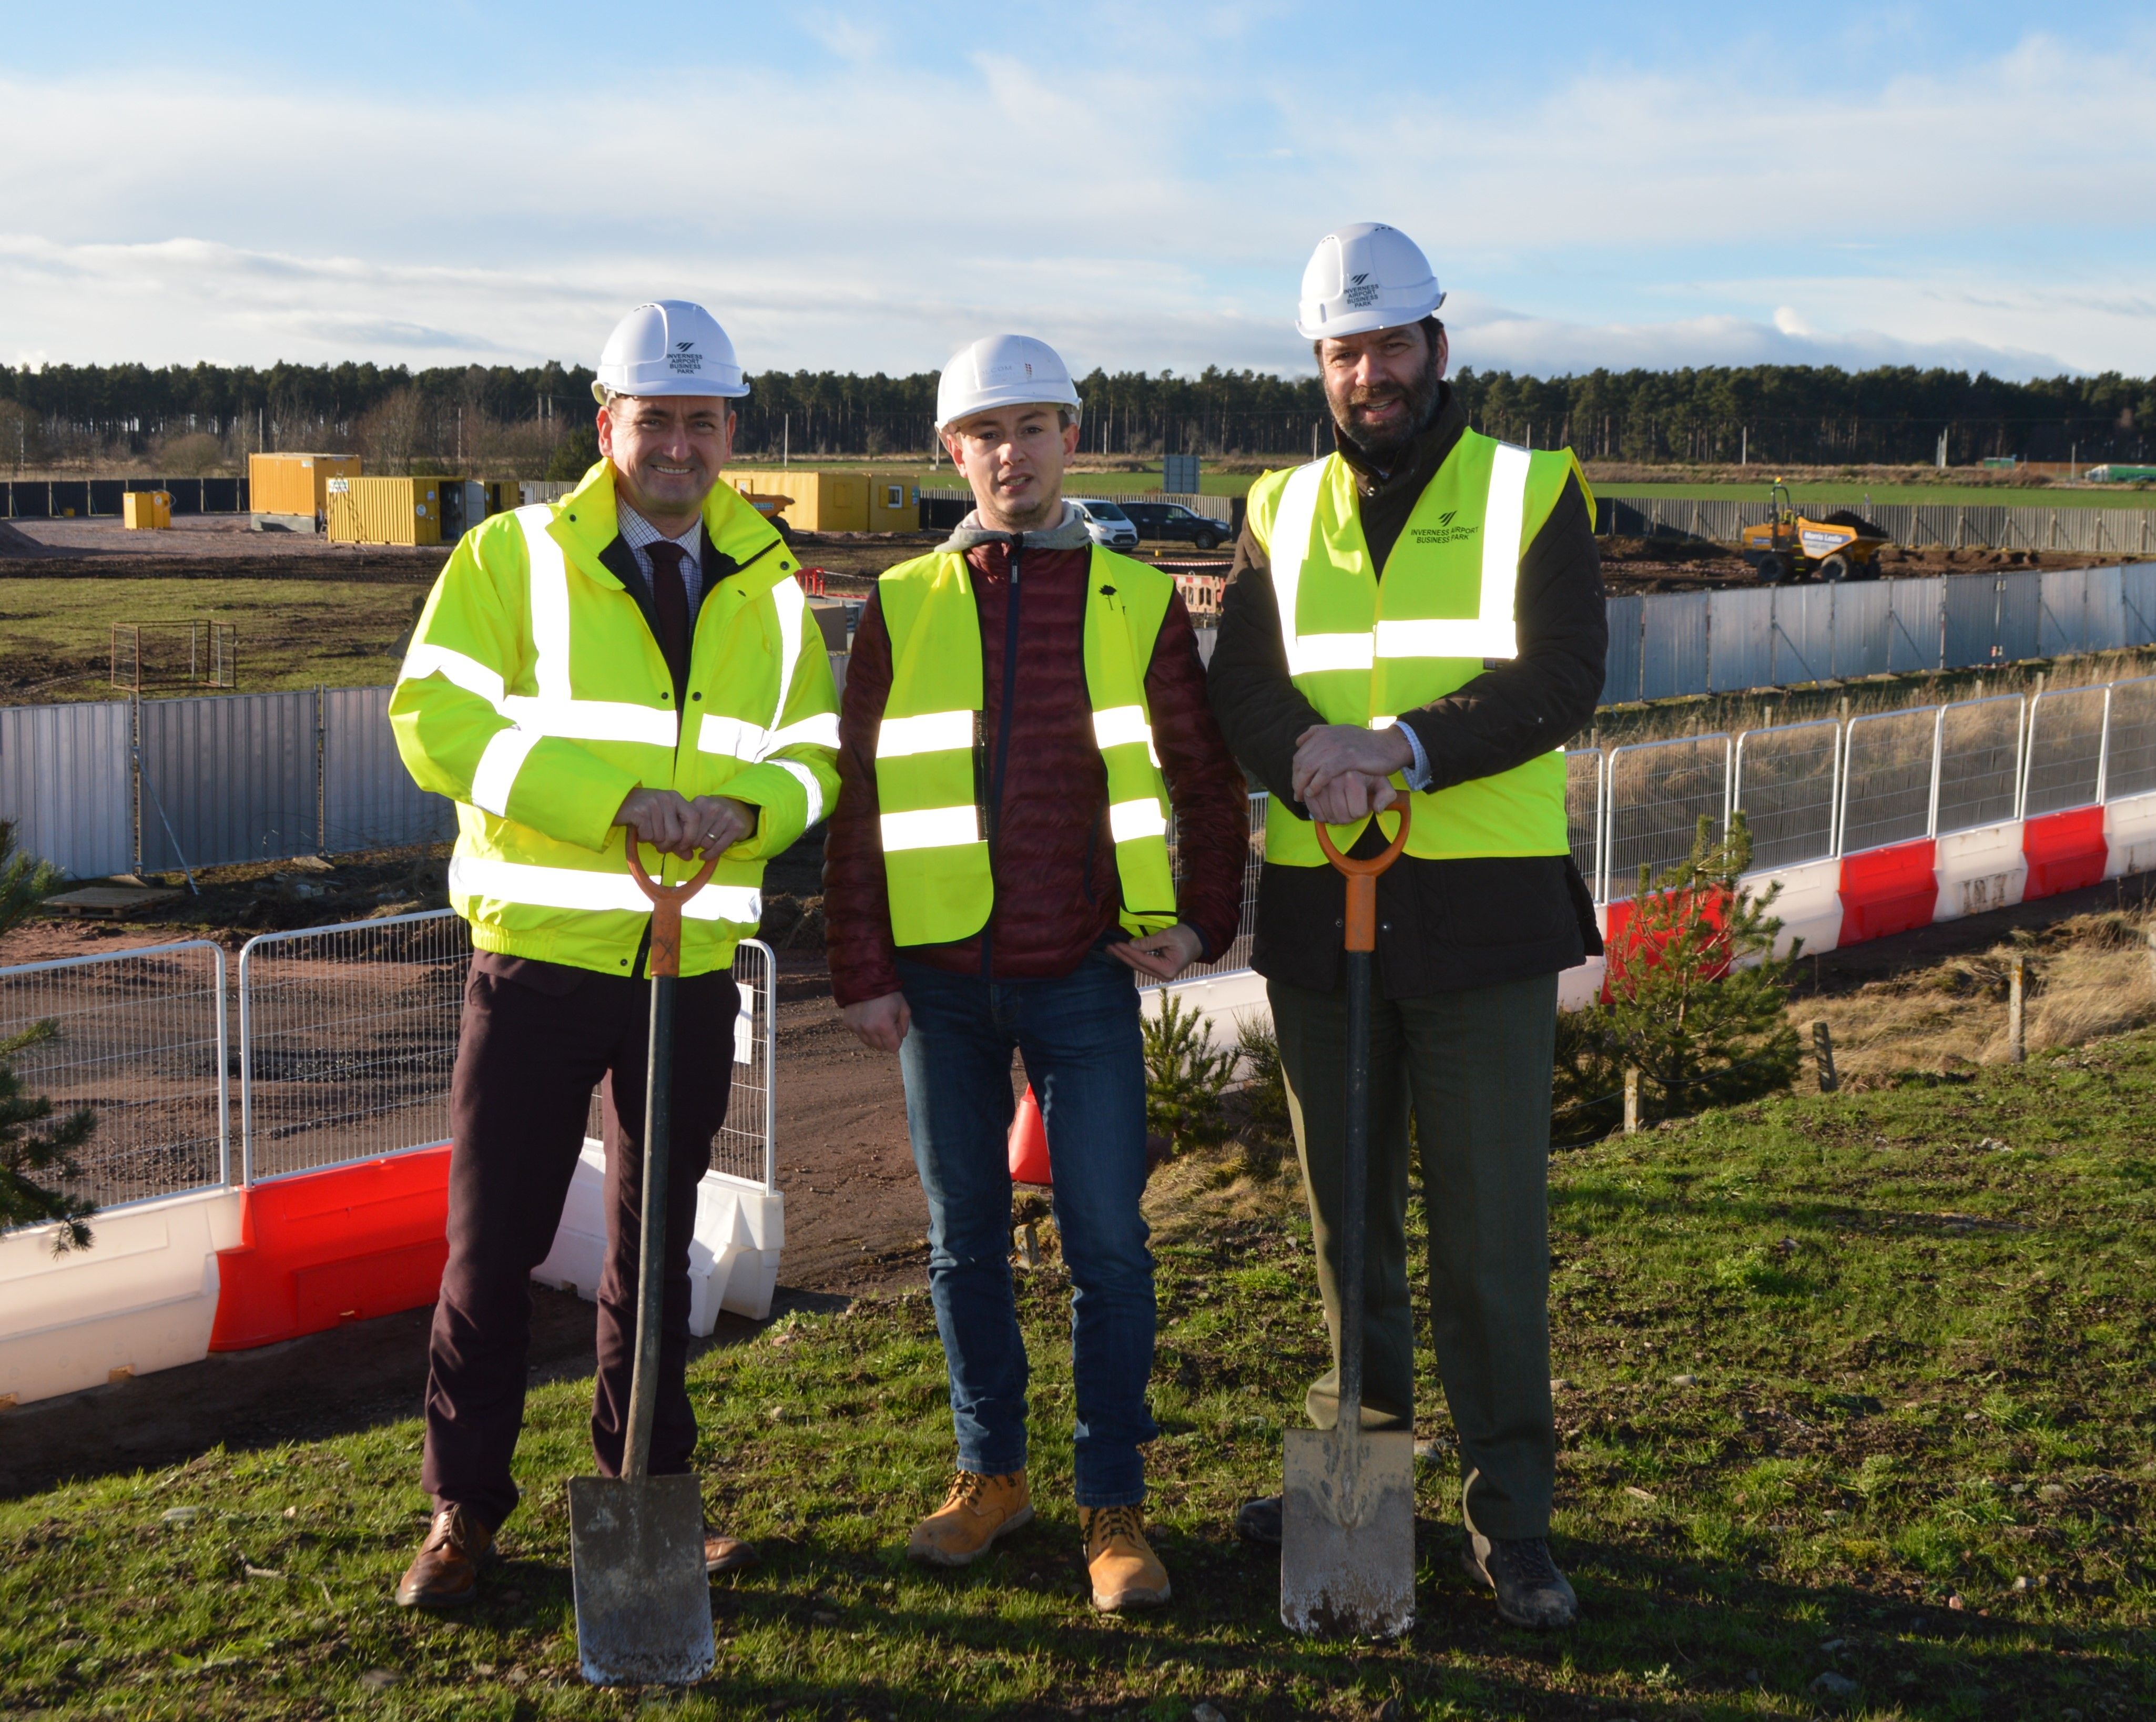 General manager of Inverness Airport Graeme Bell, Polcom Construction Site manager Adam Weyna, and director of Inverness Airport Business Park Andrew Howard at the site as construction gets underway